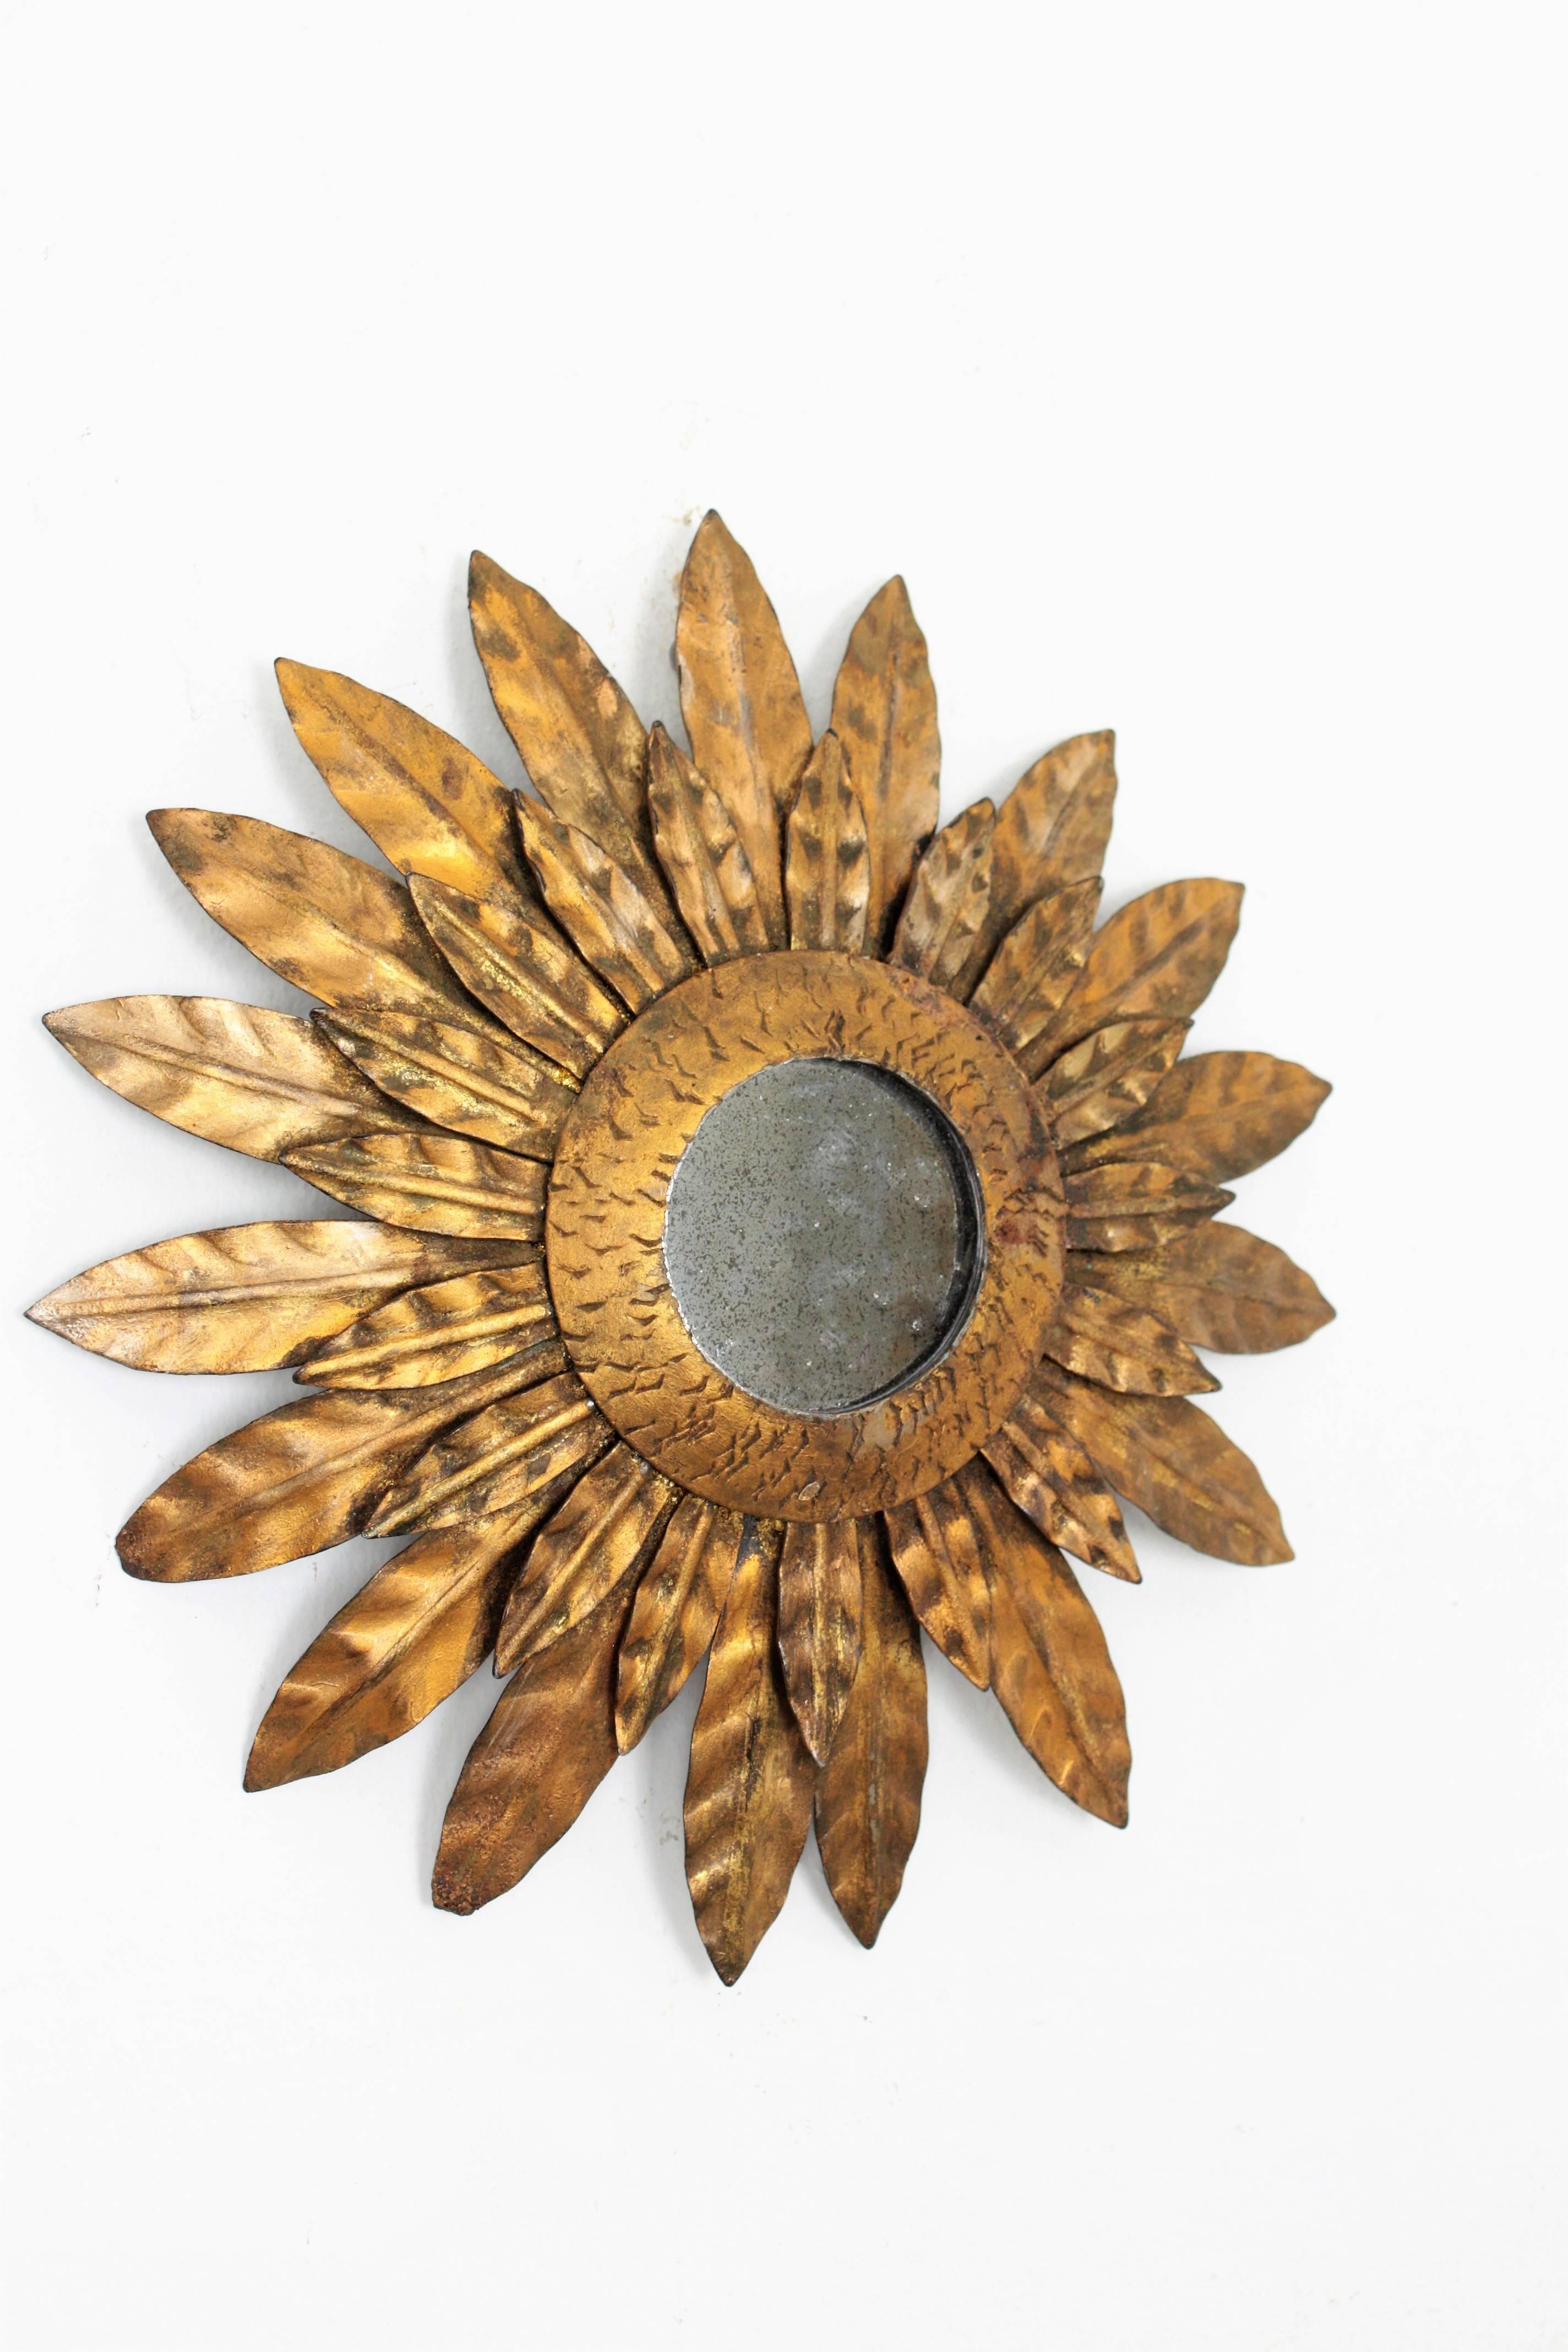 A lovely sunburst mirror of flower burst mirror made in hand-hammered iron with gold leaf finish in an unusual small size.
This piece is beautiful placed alone or hung with other mirrors in this manner creating a wall decoration with sunburst